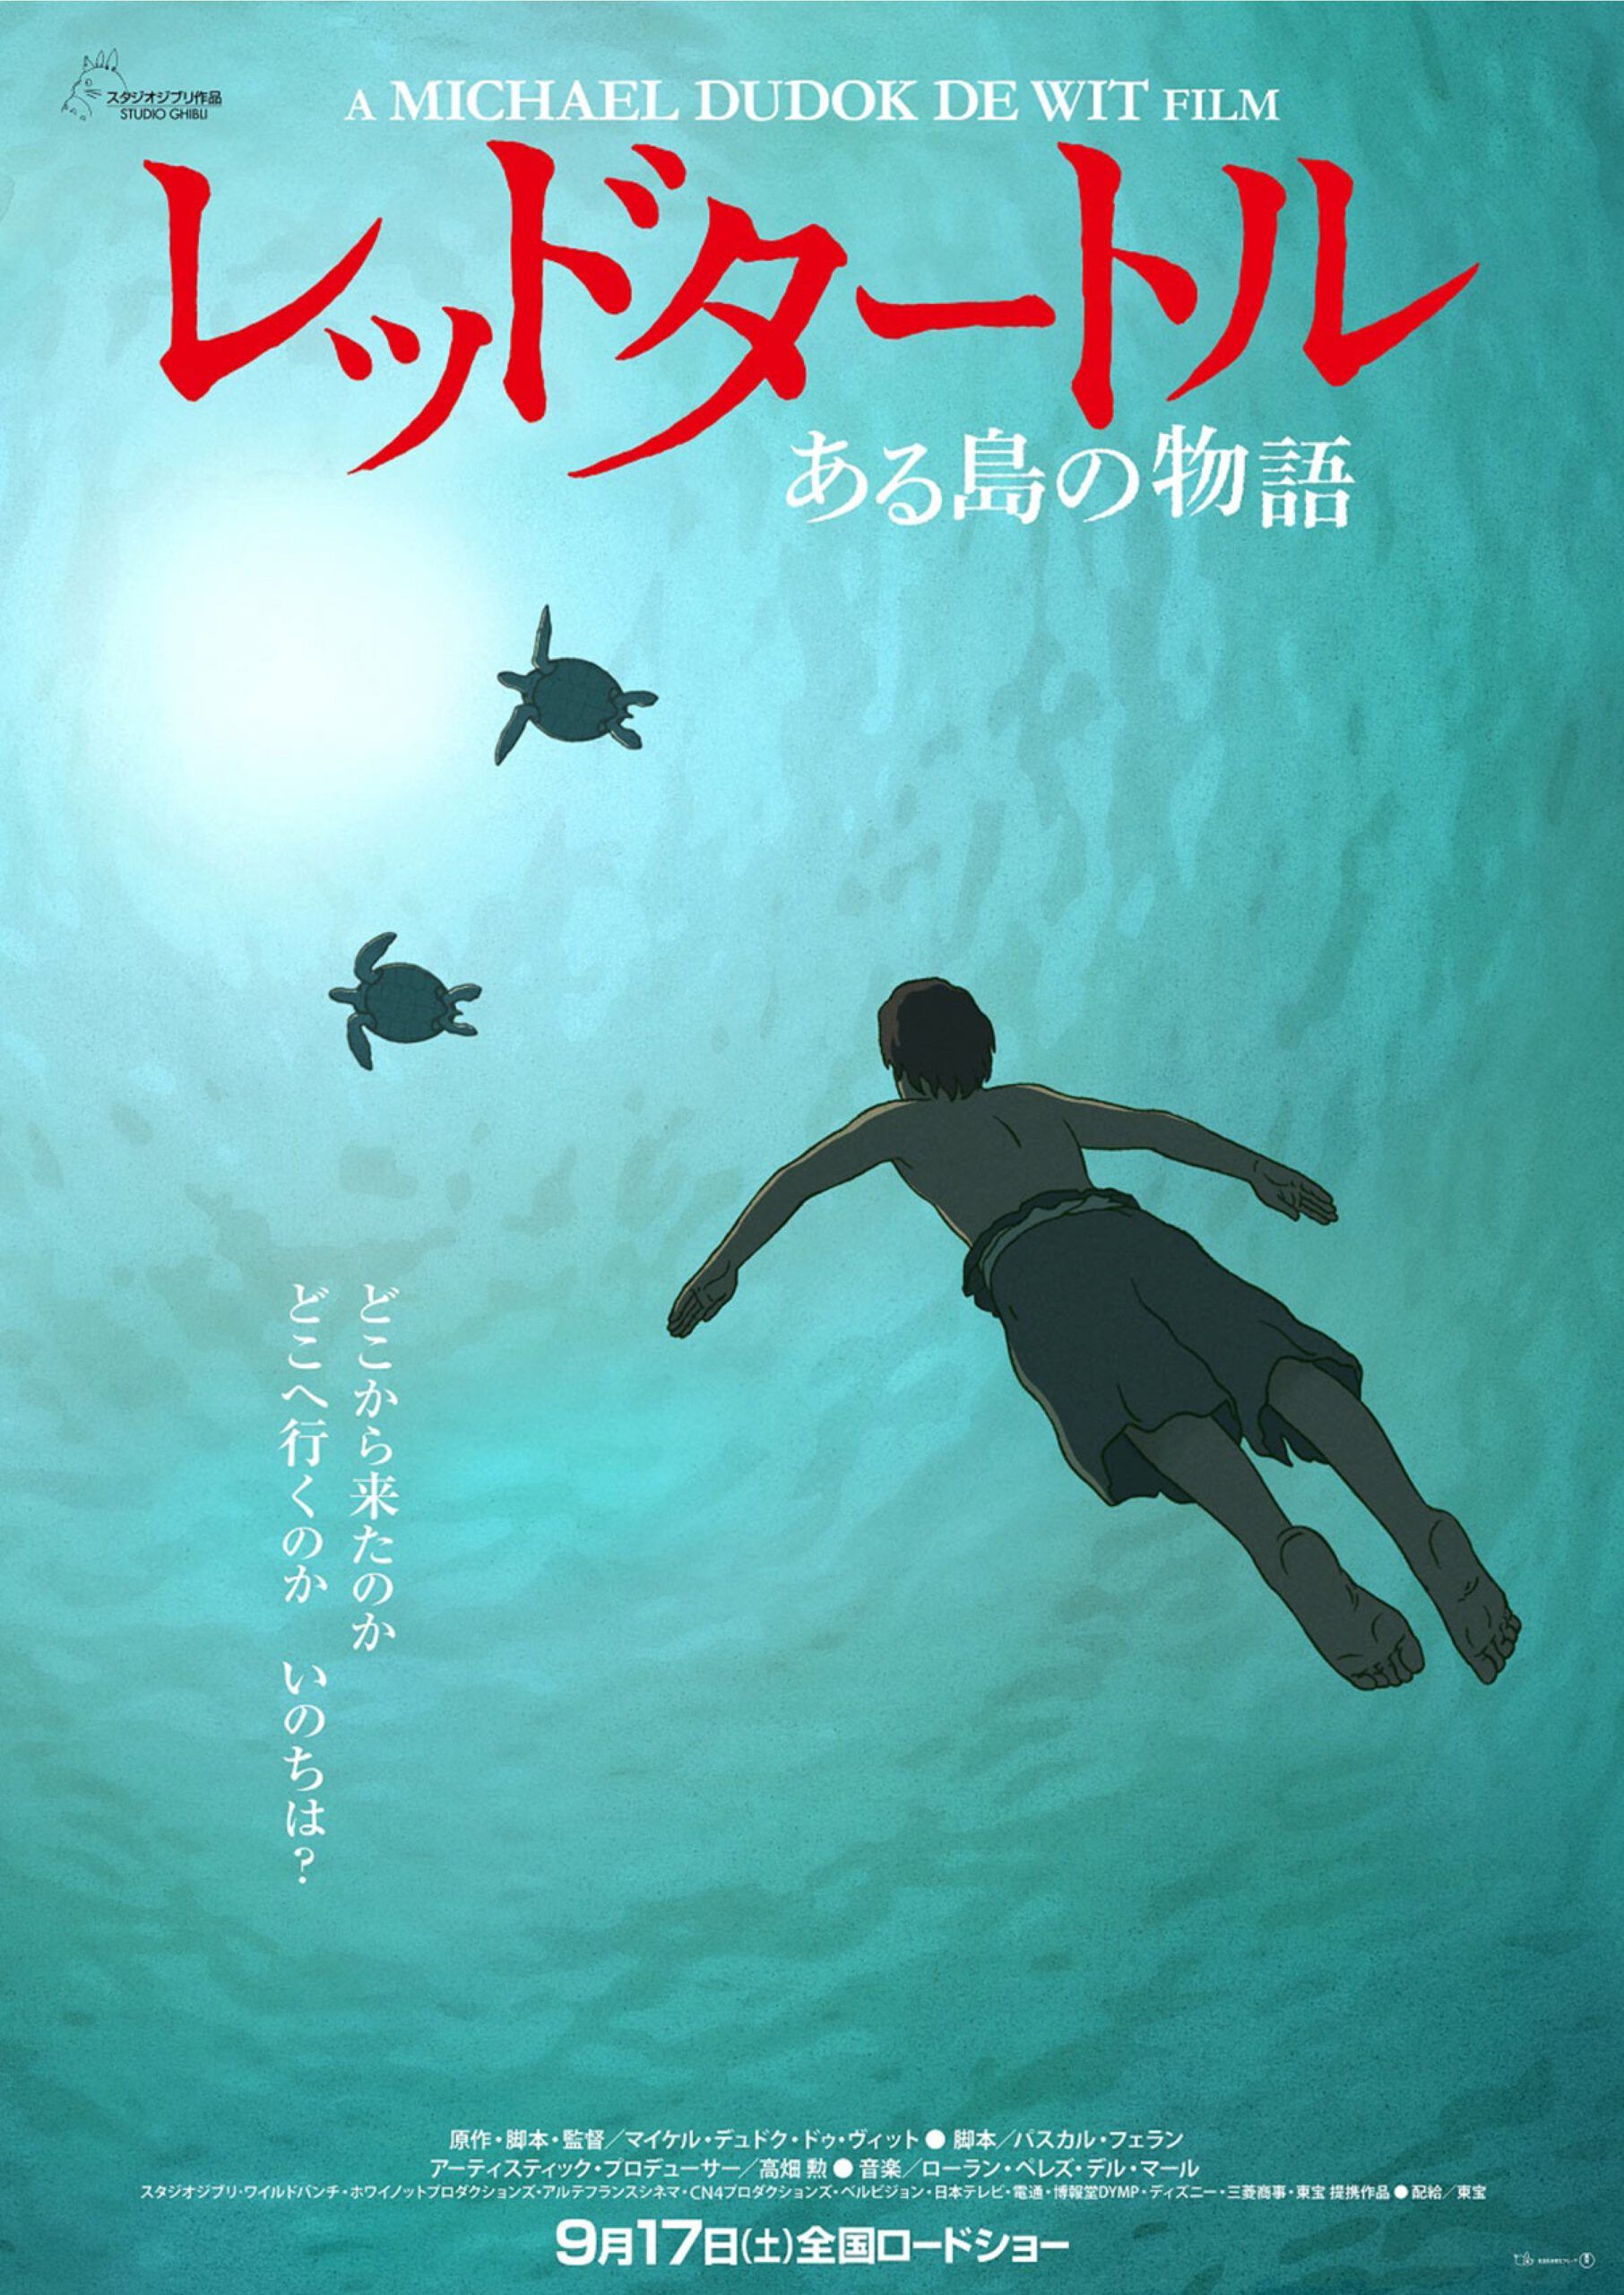 Poster The Red Turtle